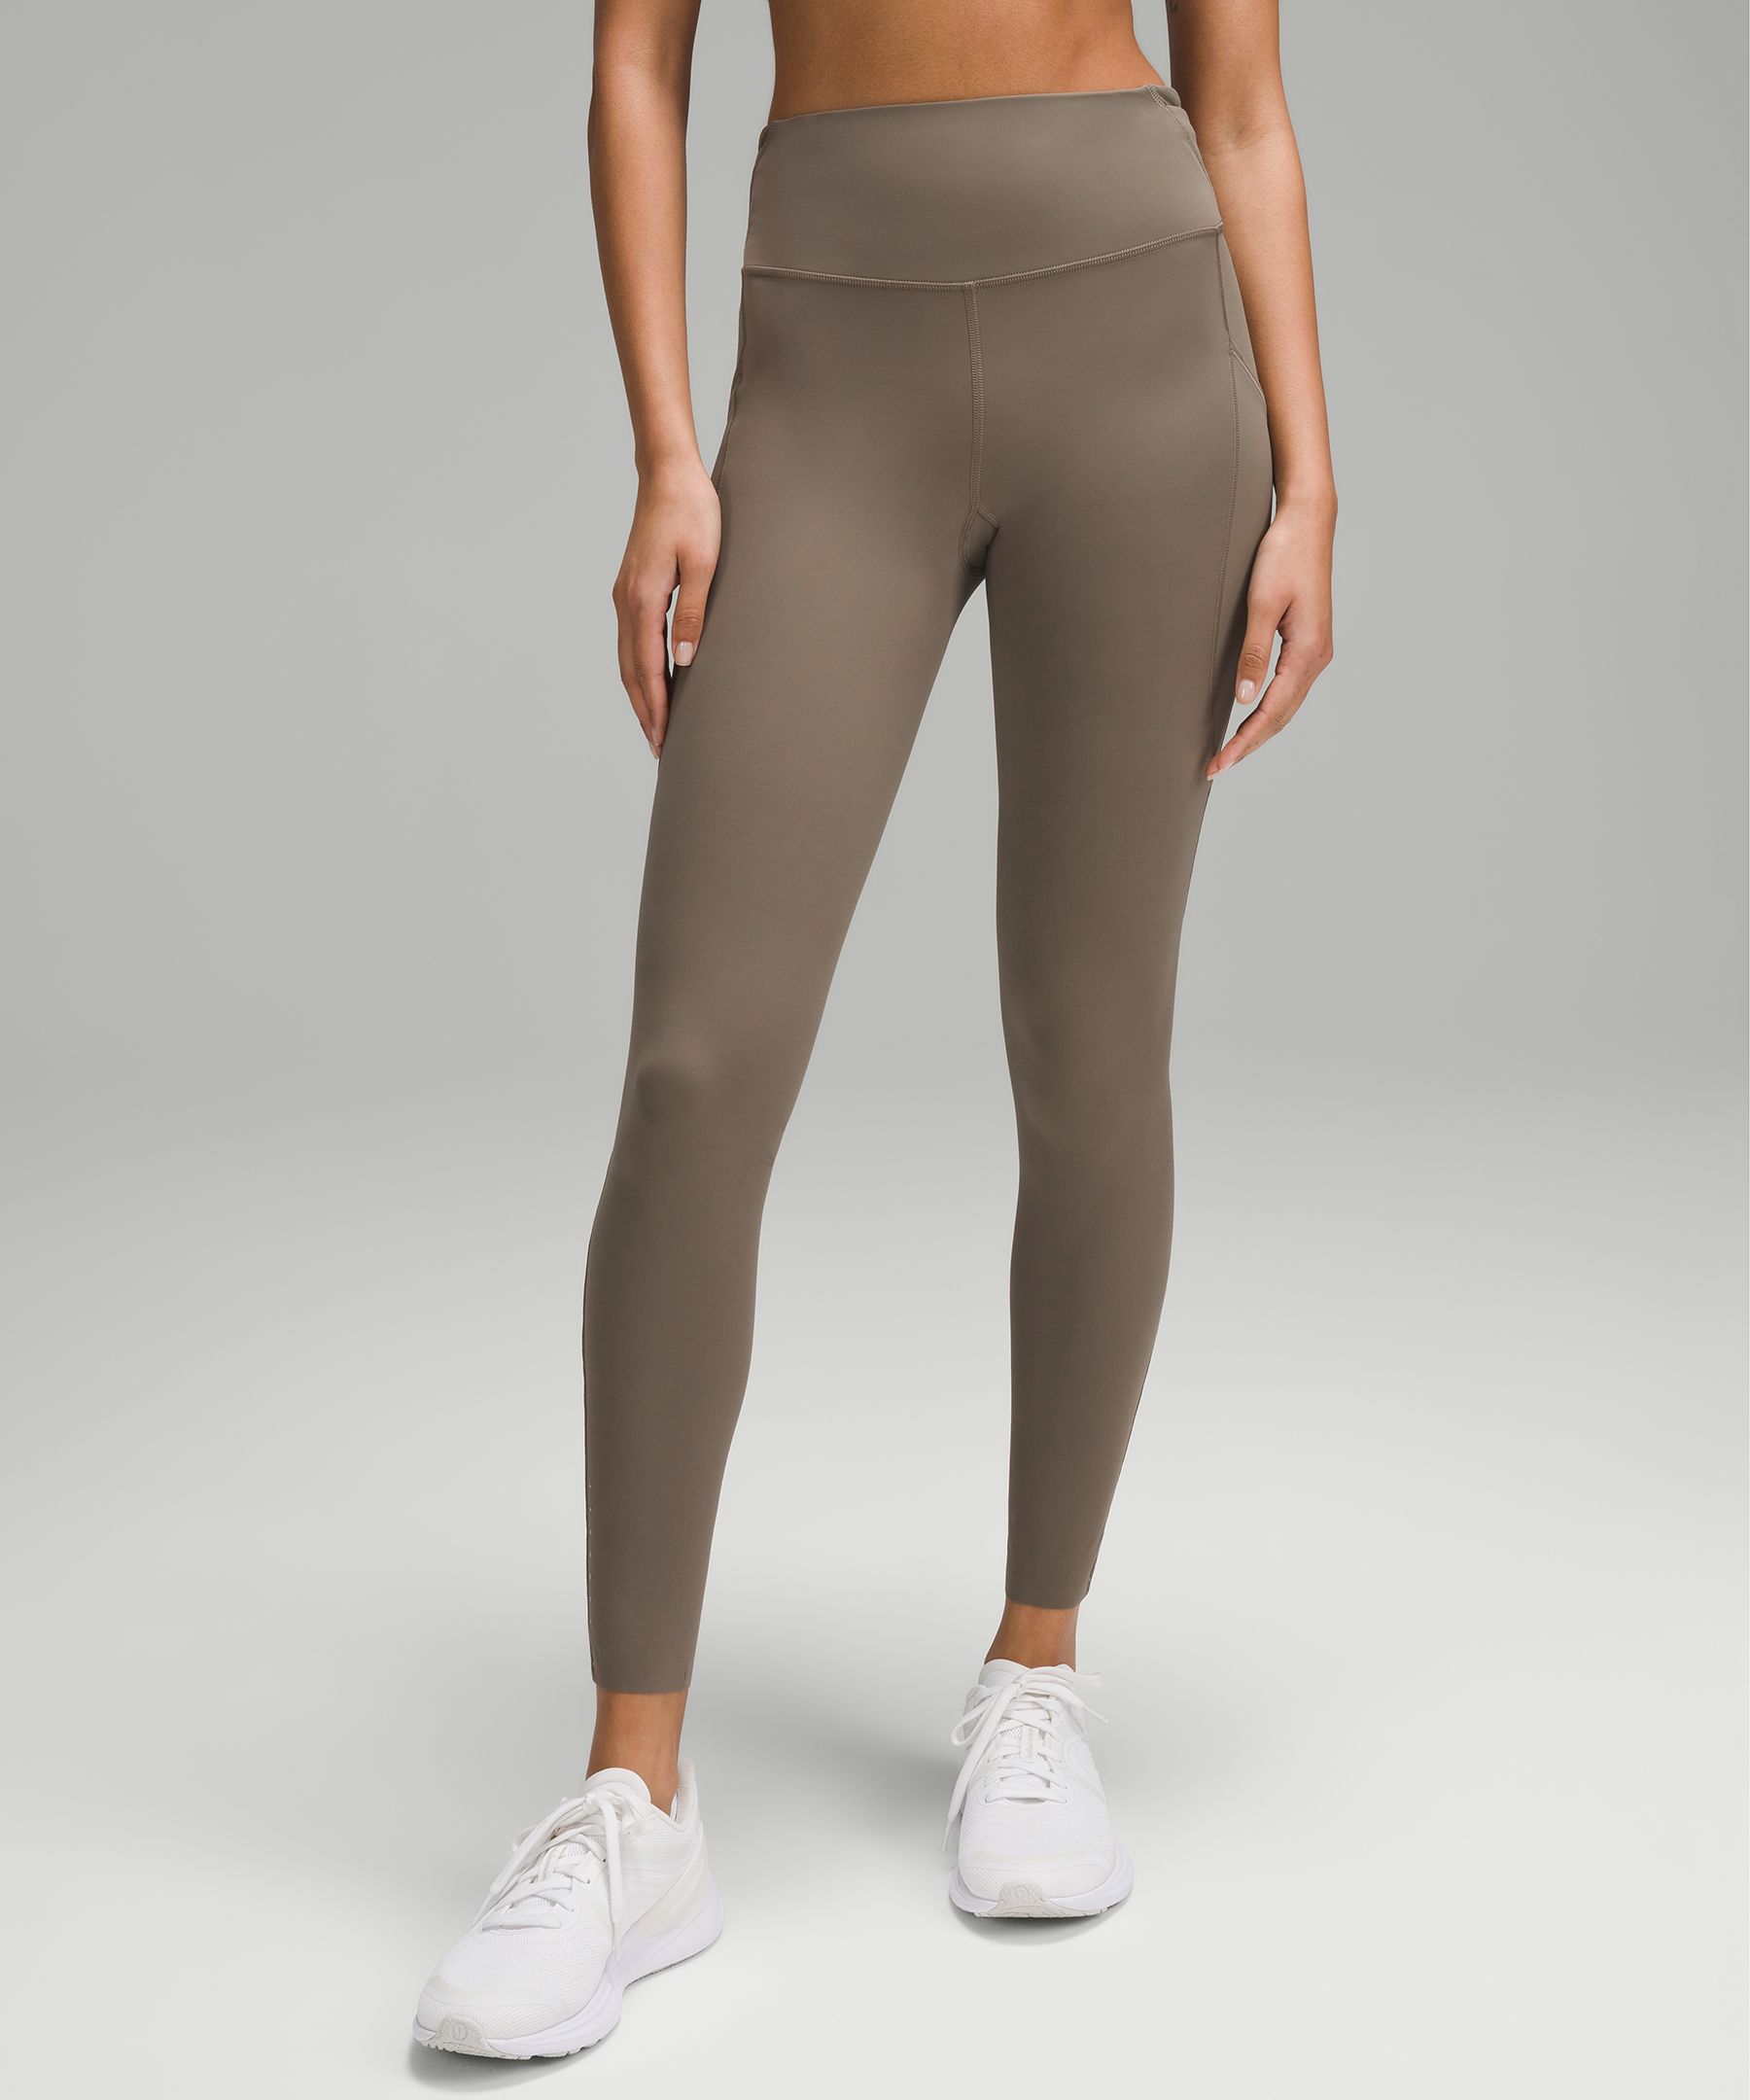 Lululemon lab Nulux and Mesh High-Rise Tight 25 - Anchor - lulu